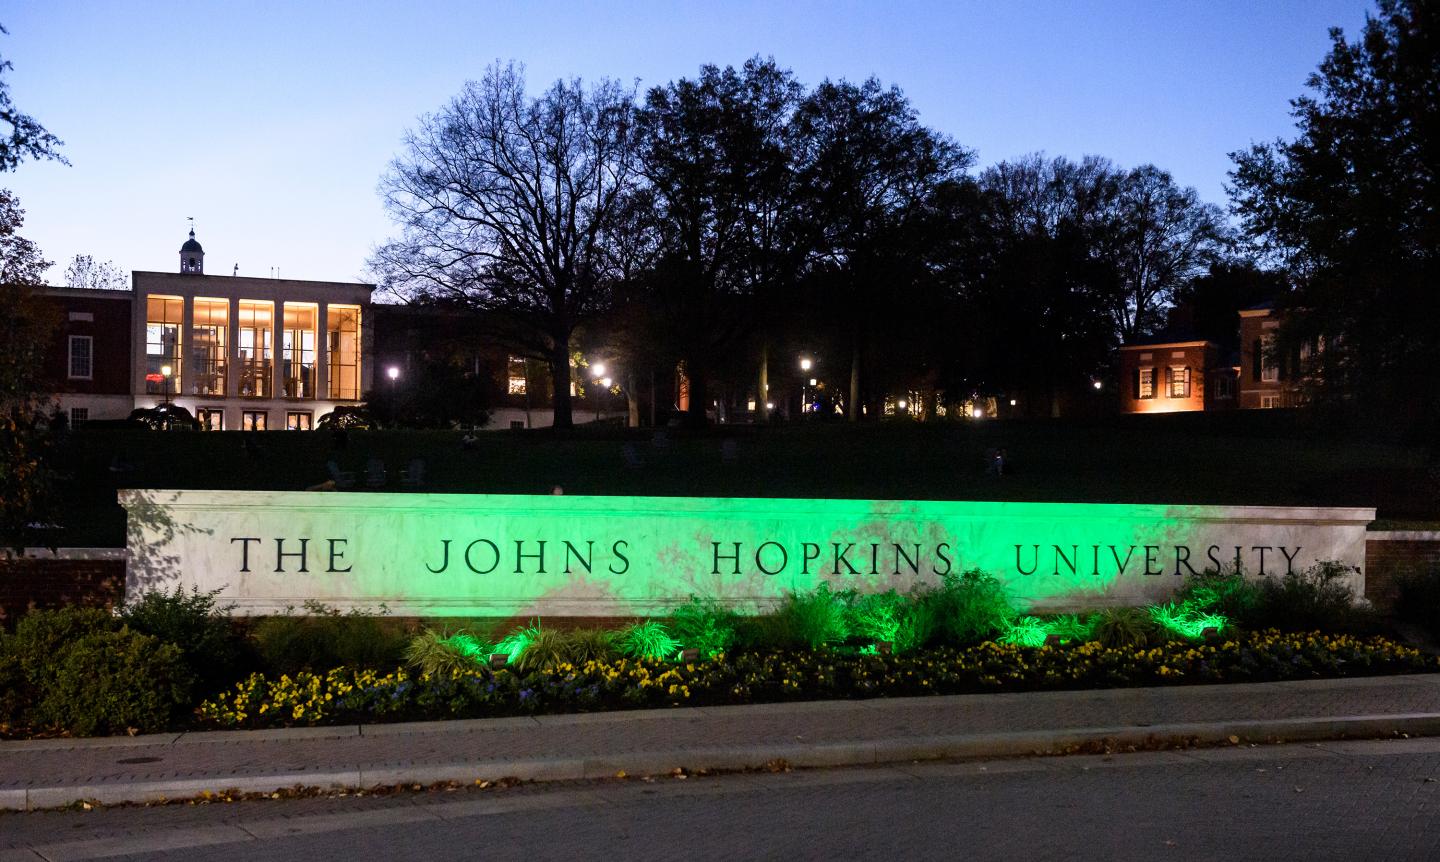 The Johns Hopkins University sign is bathed in green light at sunset